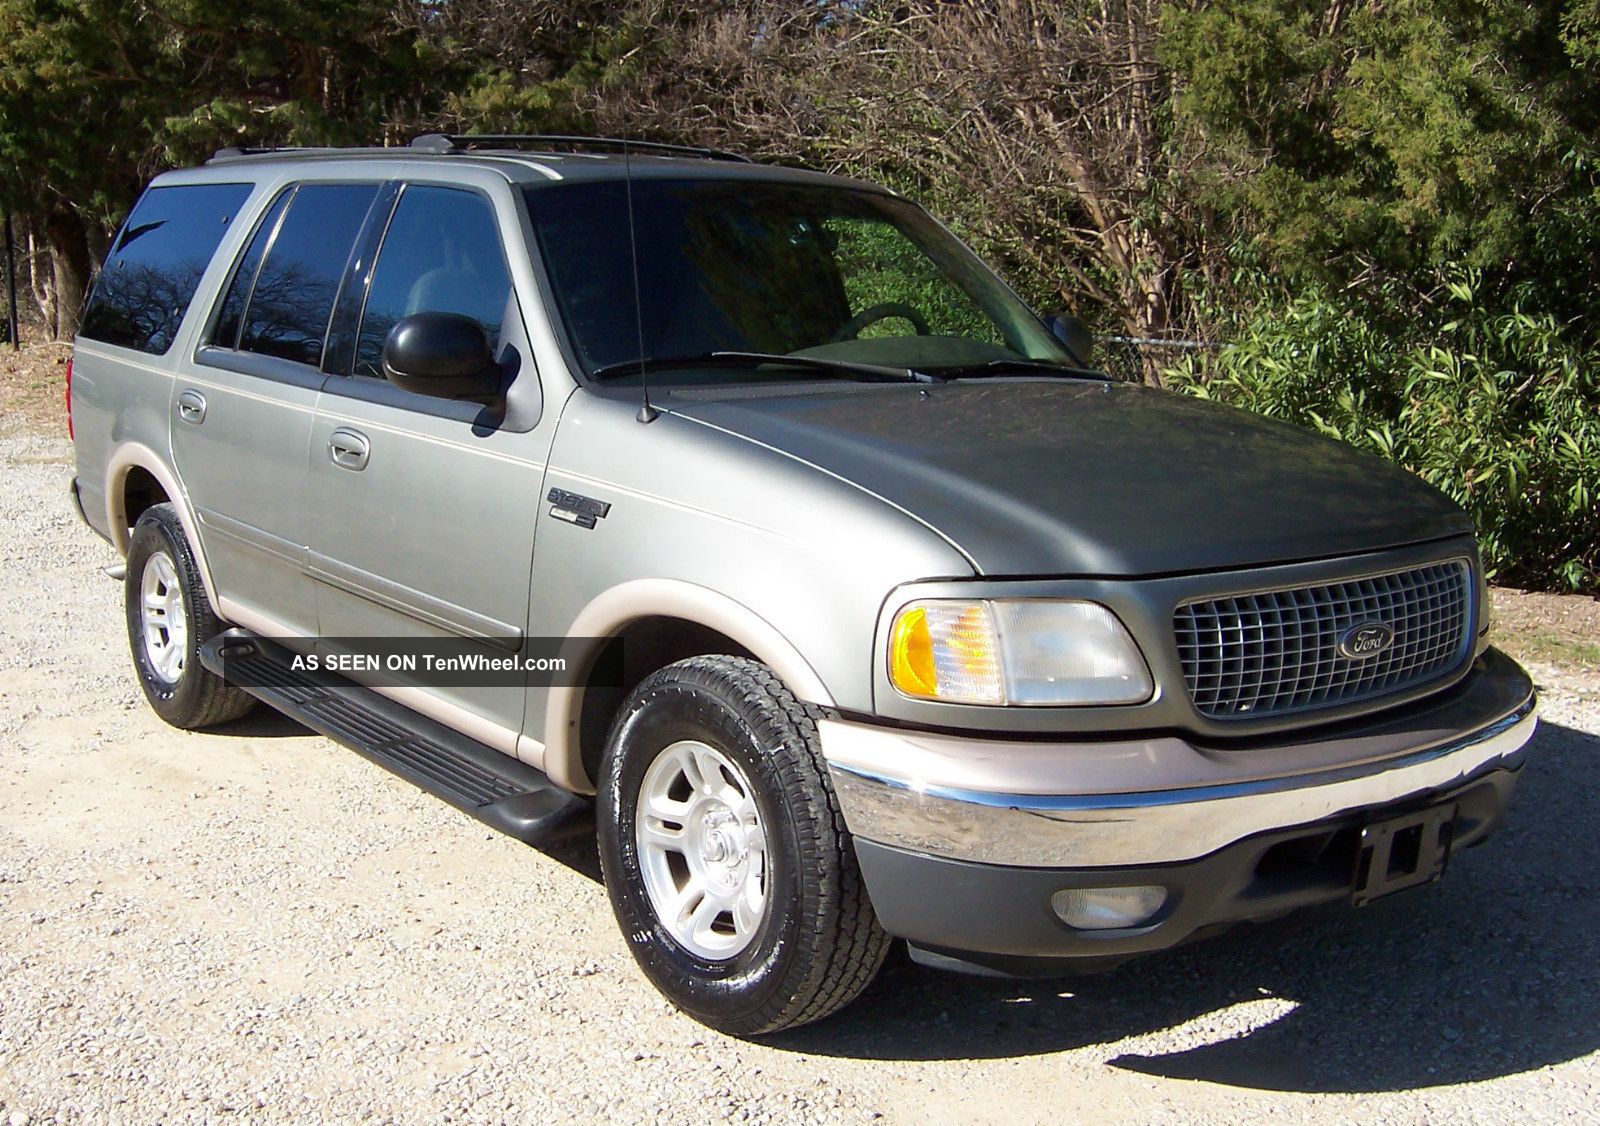 1999 Ford expedition eddie bauer edition reviews #3